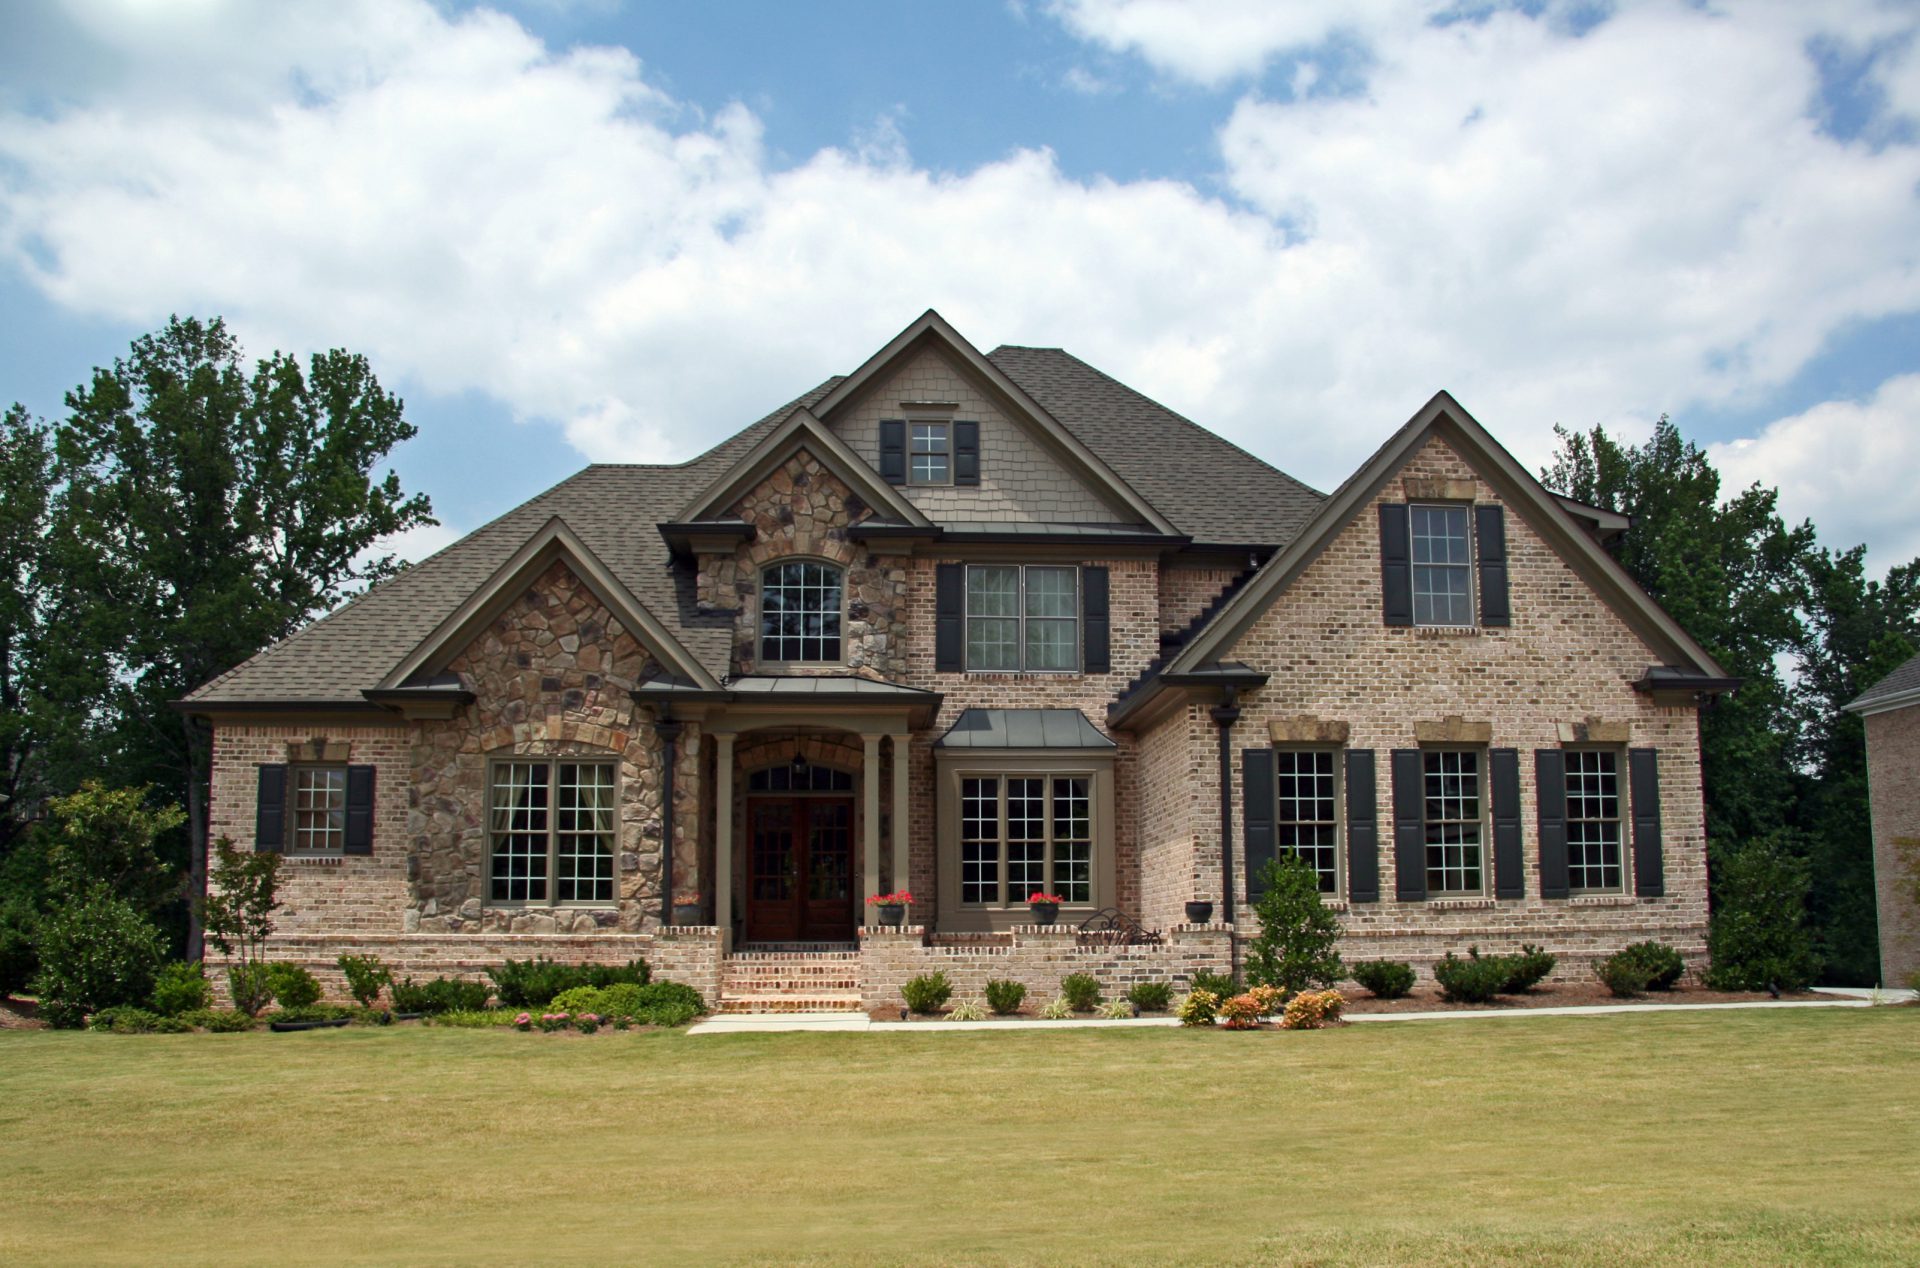 Upper class luxury home with intricate stonework and brick